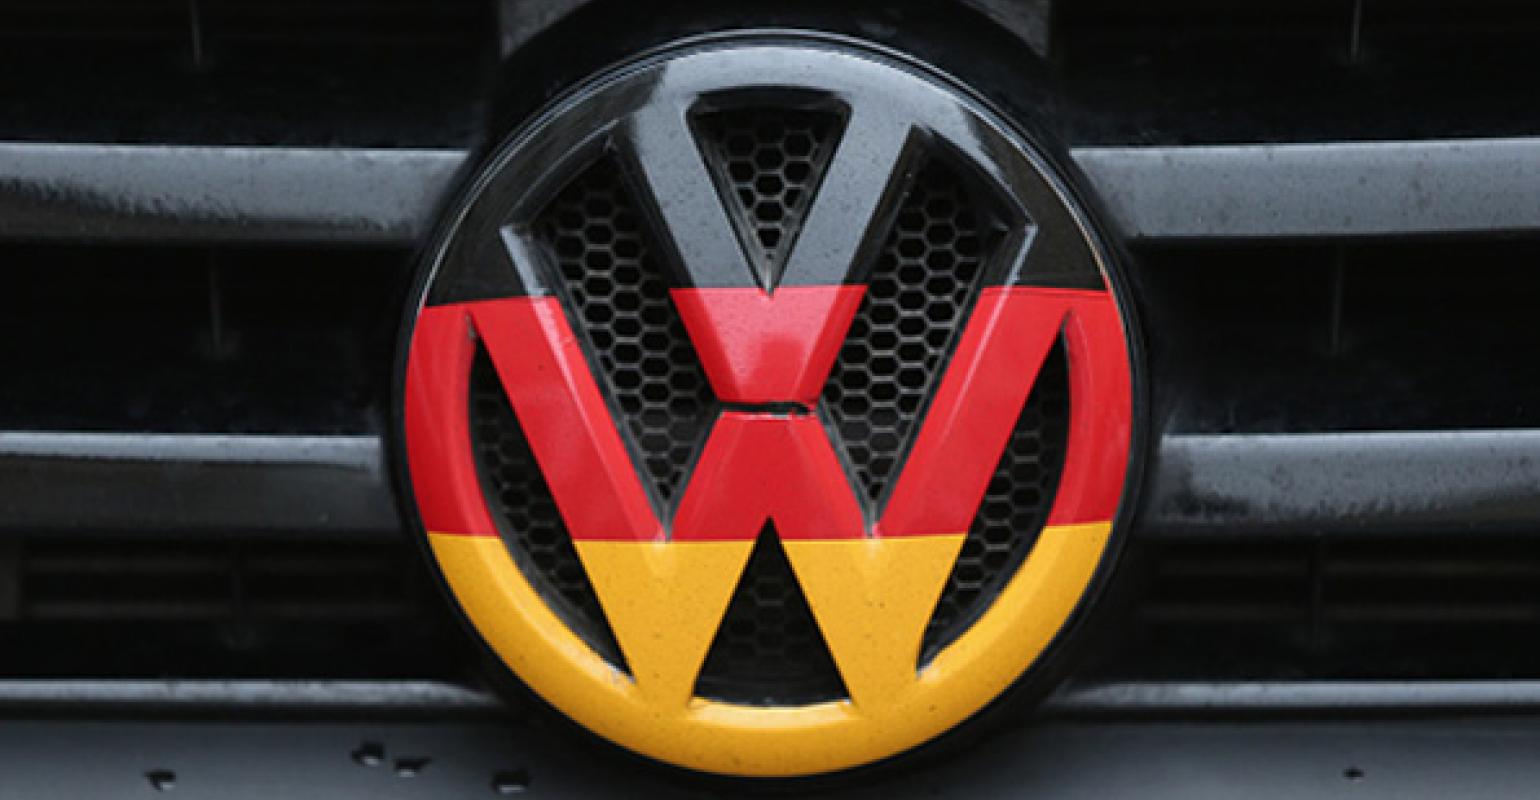 Volswagon Logo - Volkswagen Taking Action to Curb Future Oversights, Scandals